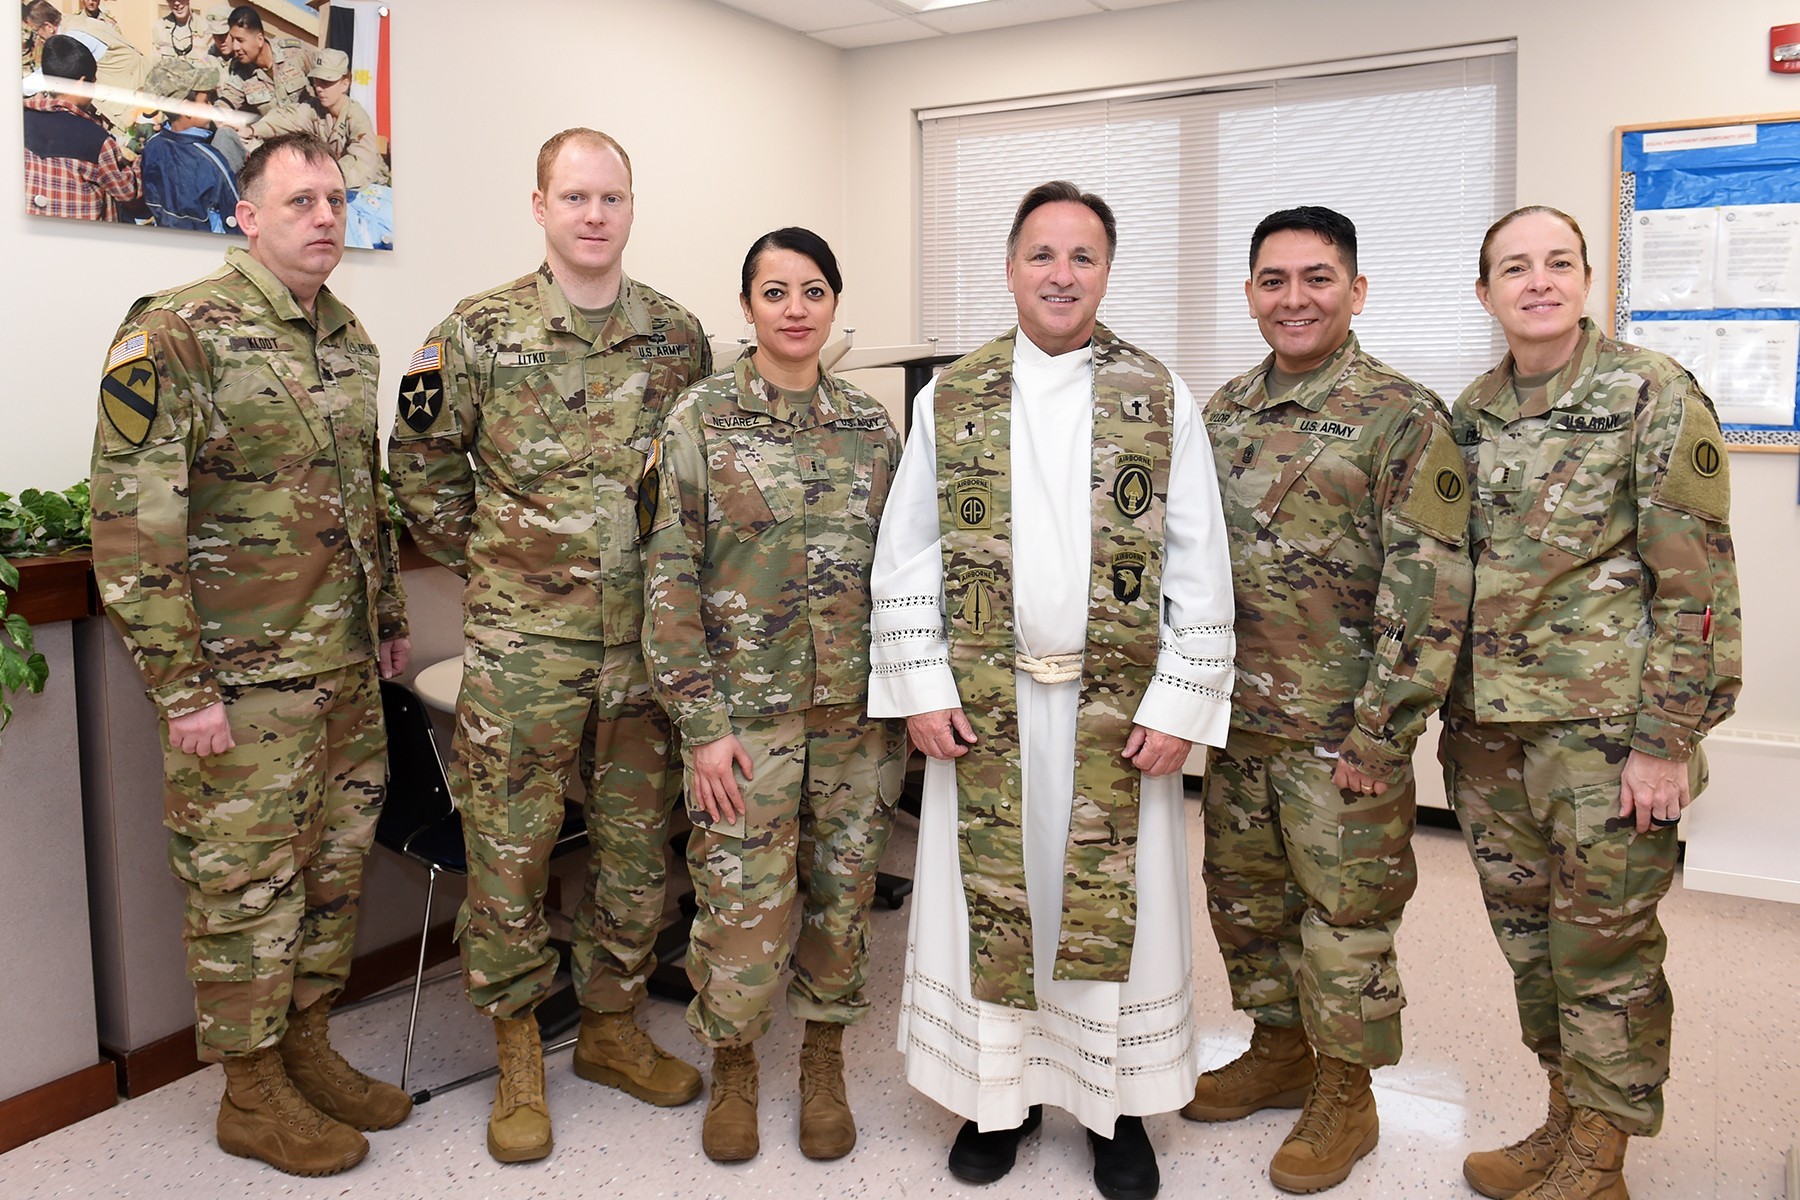 Former Army chaplain who inspired famed SNL character role continues